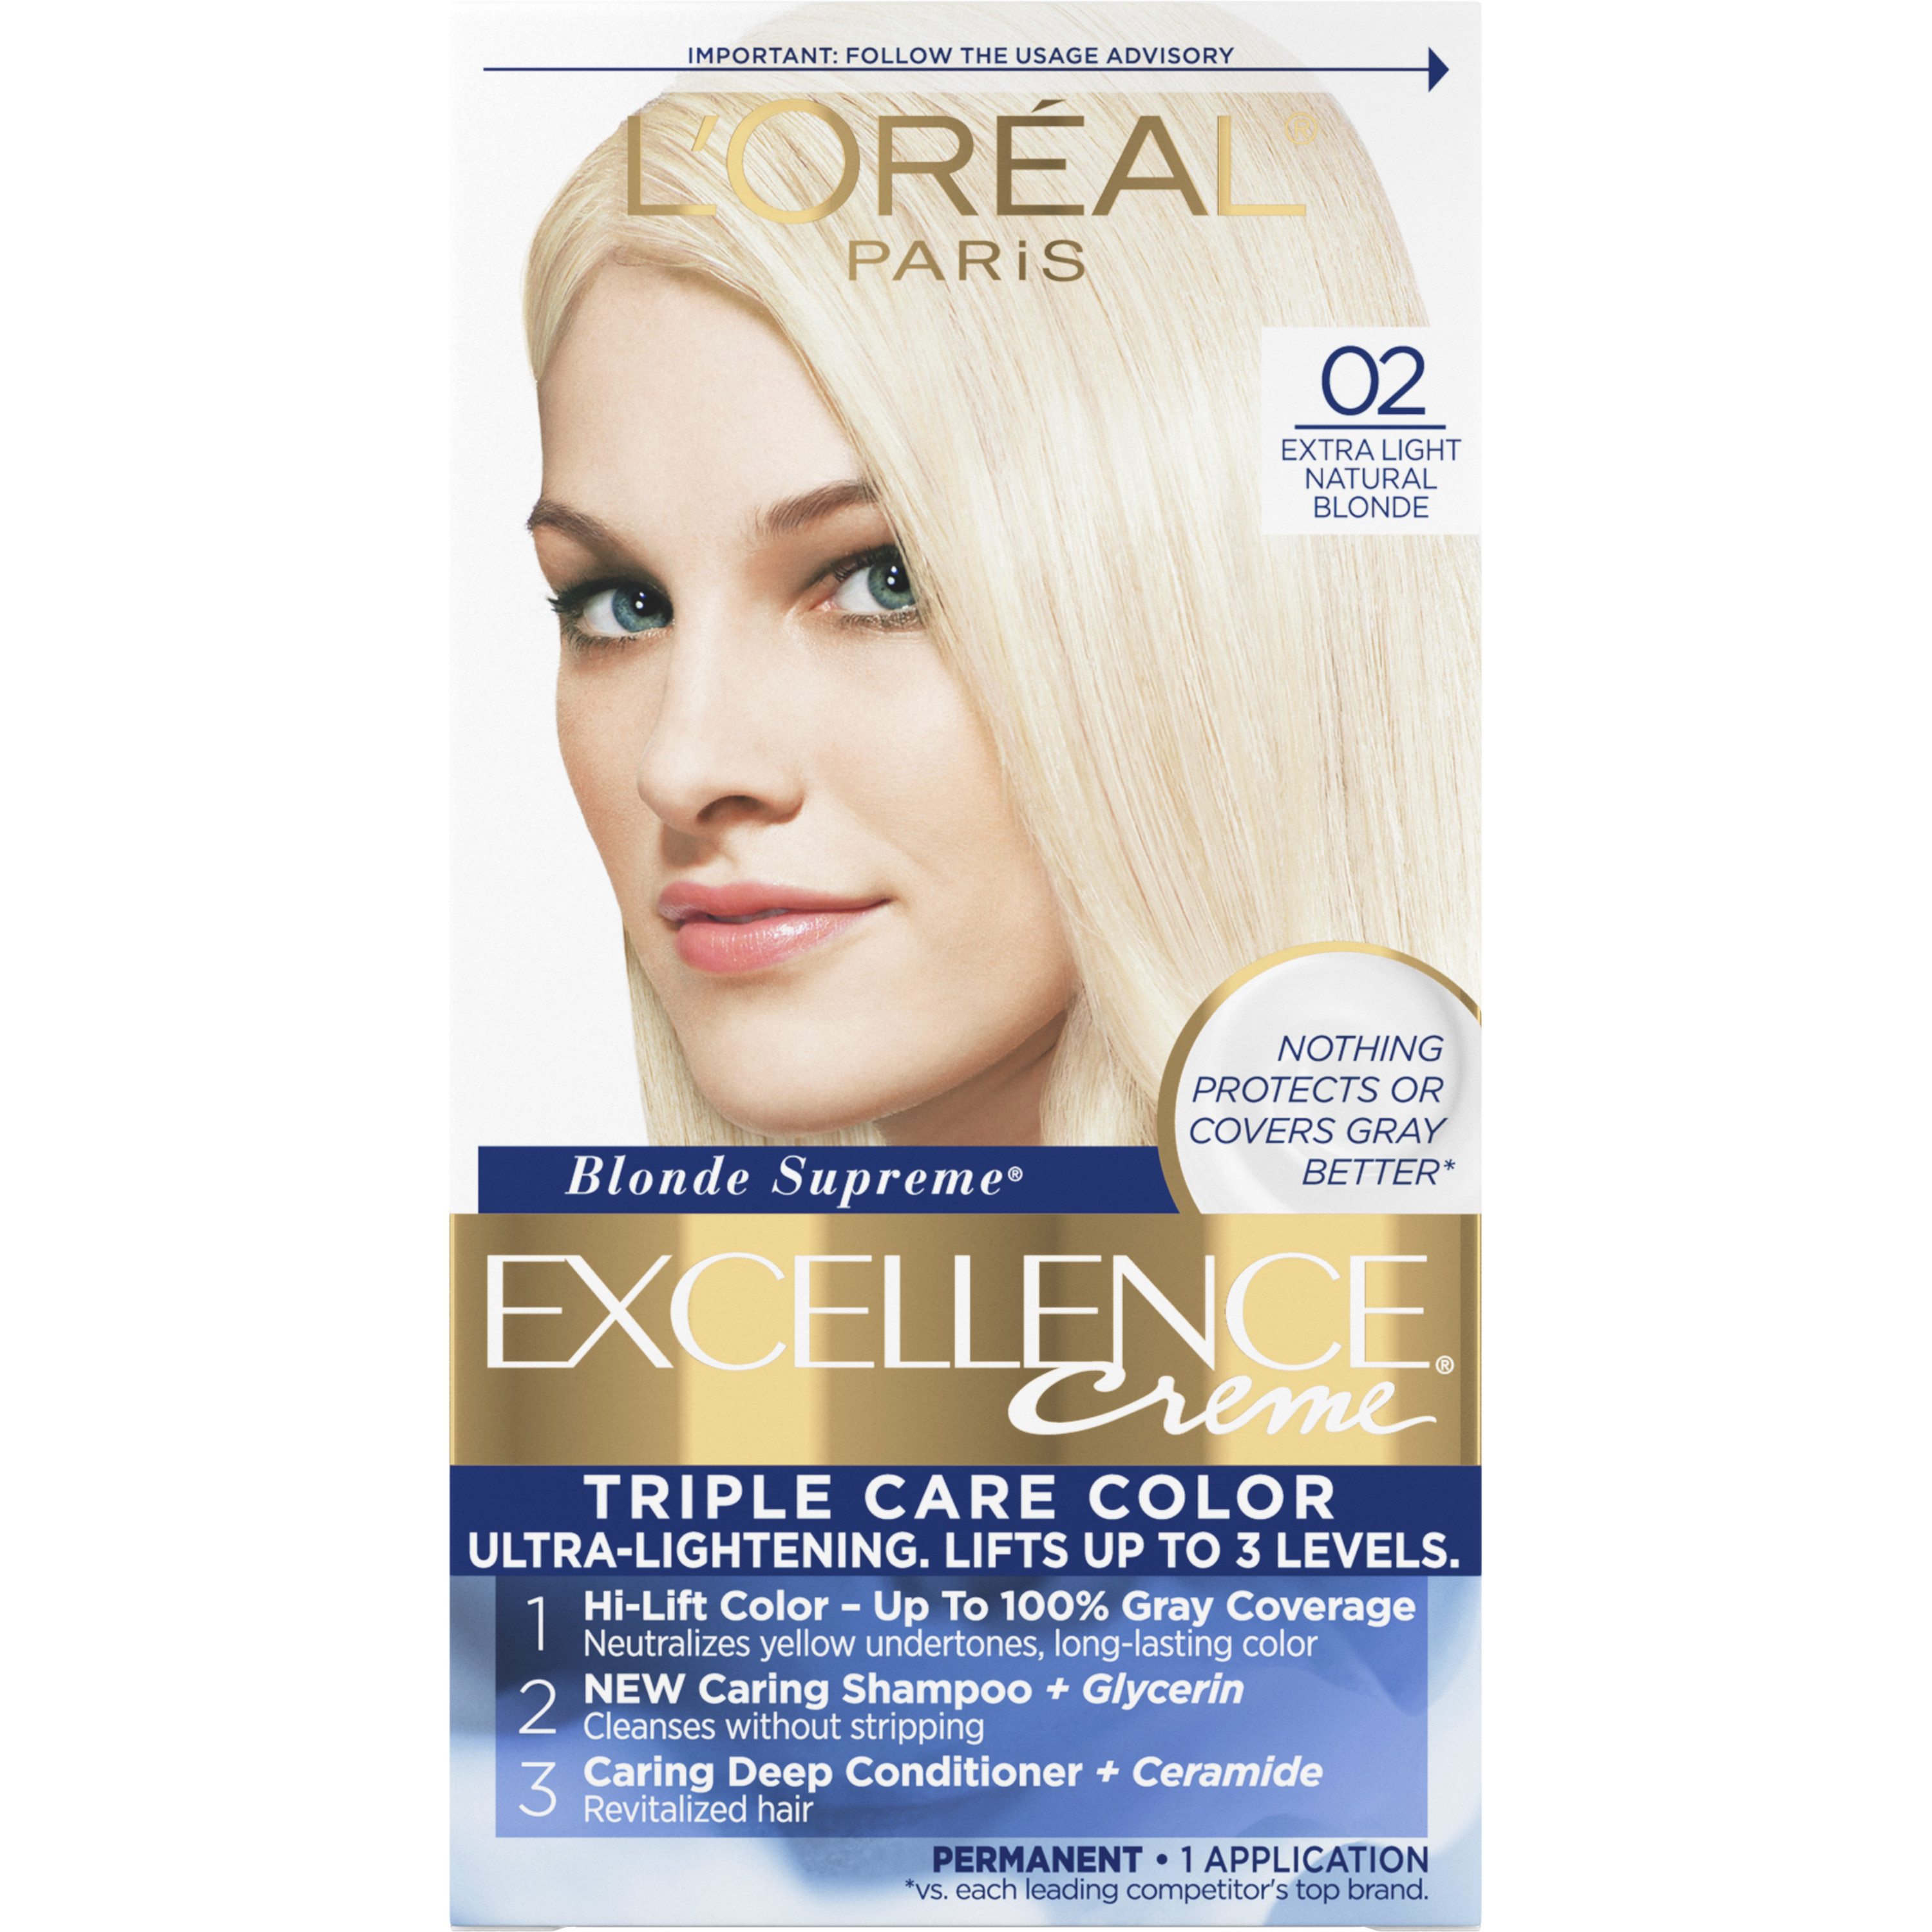 L'Oreal Paris Excellence Creme Permanent Hair Color, 02 Extra Light Natural Blonde - image 1 of 6